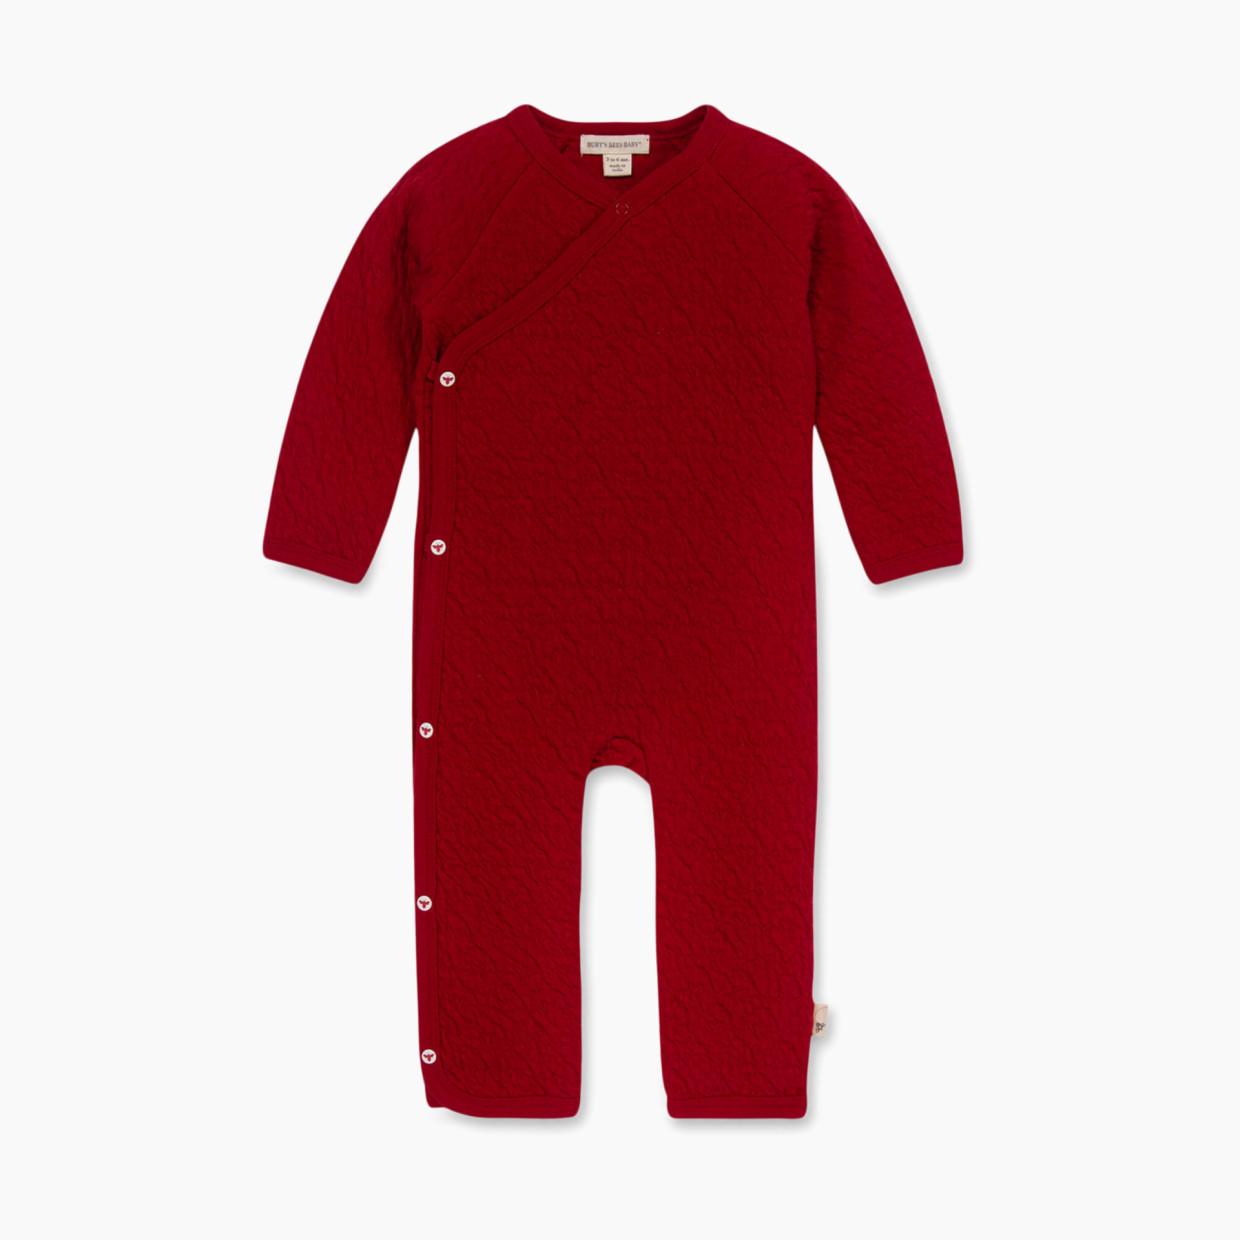 Burt's Bees Baby Romper Jumpsuit, 100% Organic Cotton One-Piece Coverall - Cardinal Red, 0-3 Months.